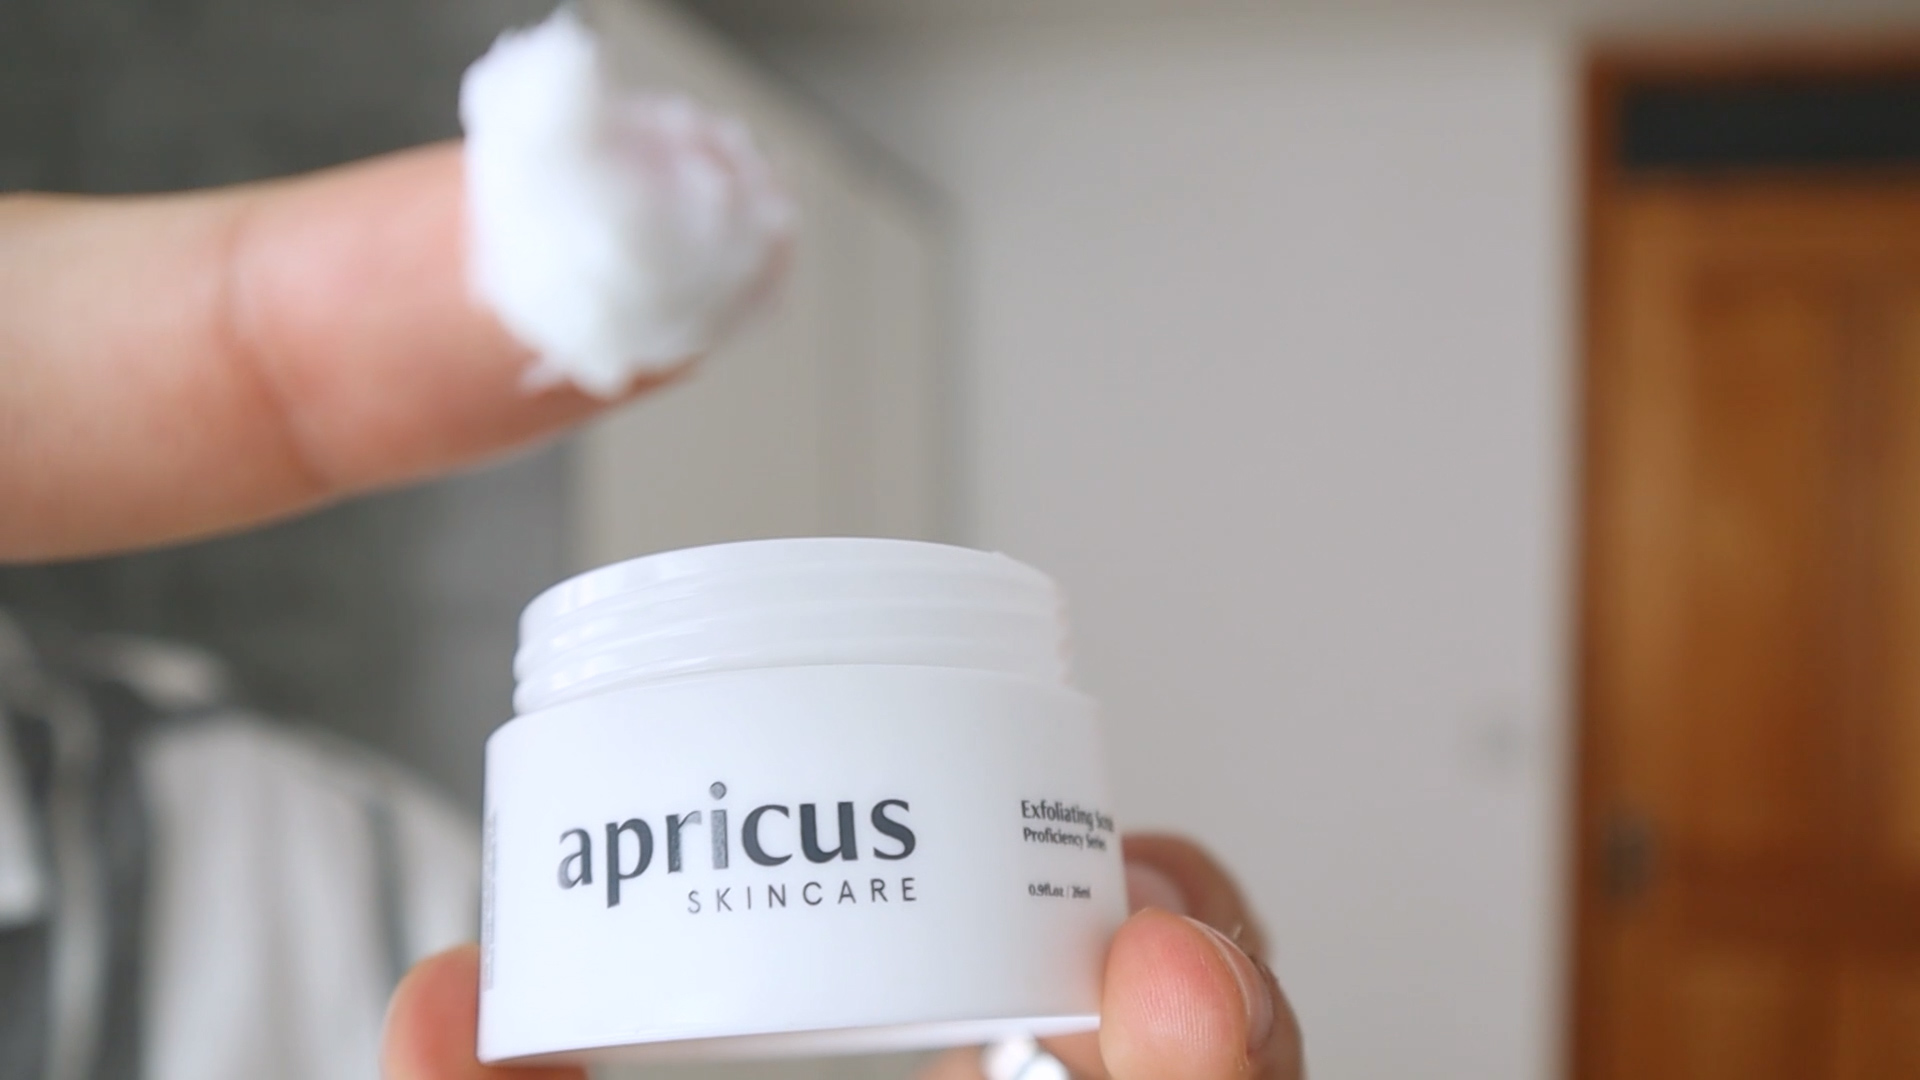 Apricus Skincare: The Ultimate Men’s Skin Care Solution by Alex Costa